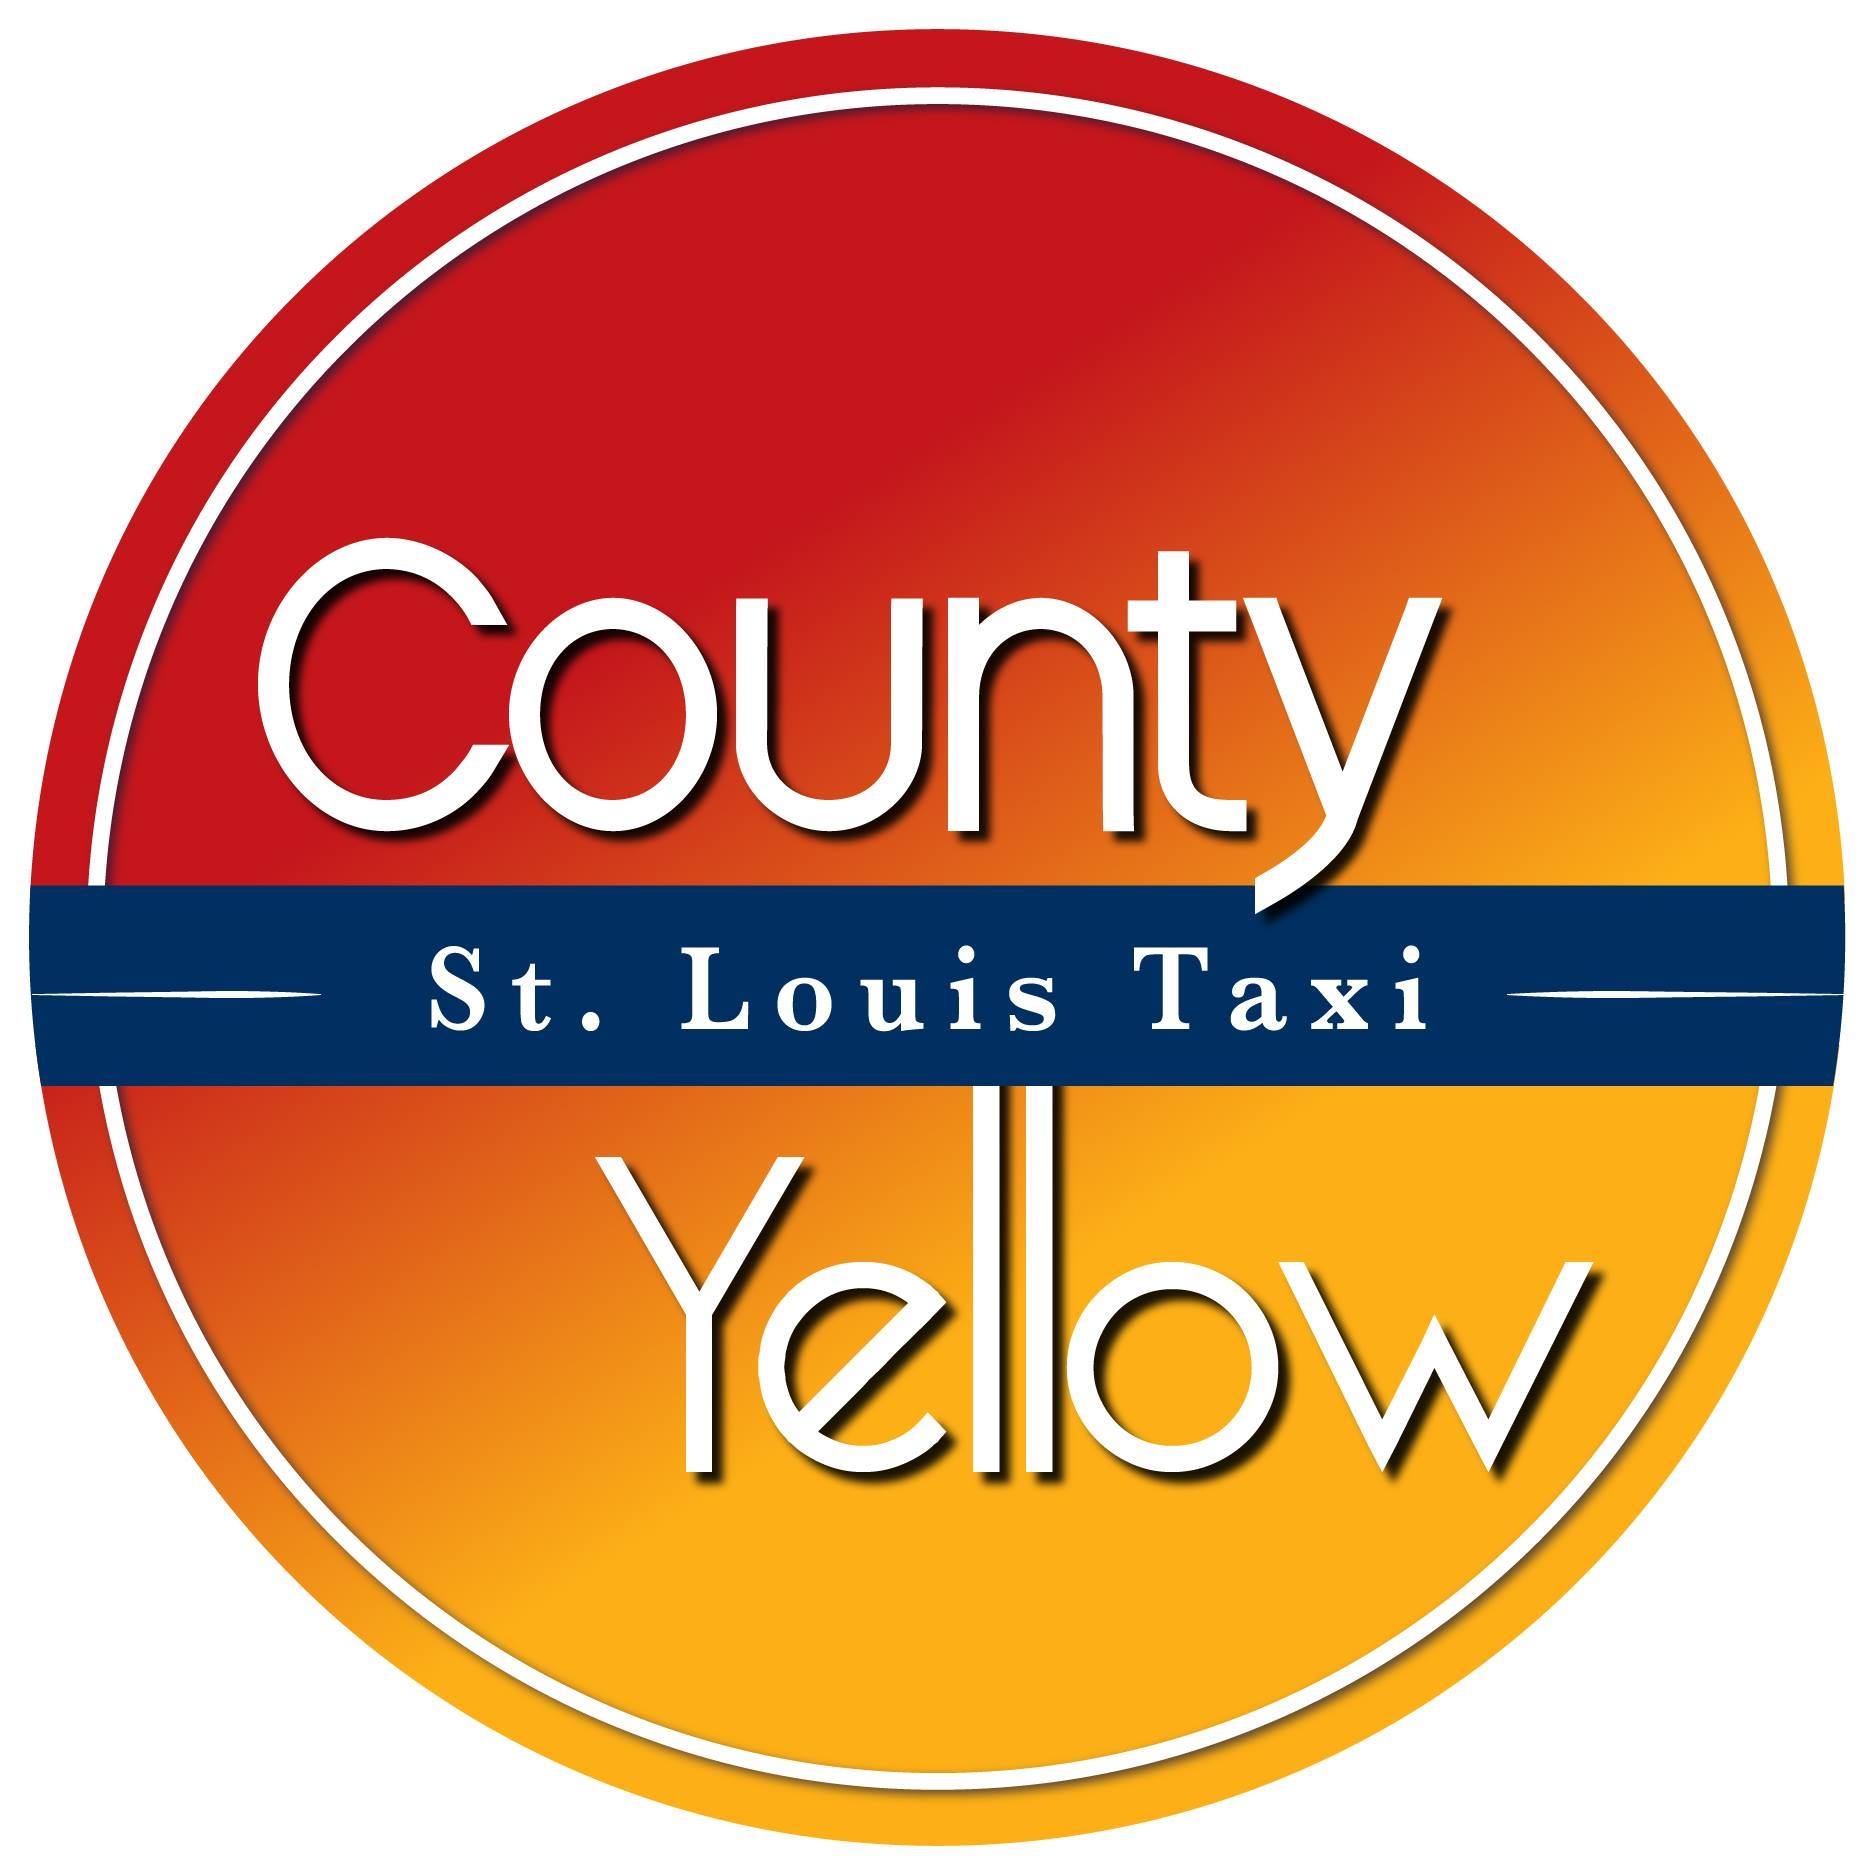 Business logo of St. Louis County & Yellow Taxi